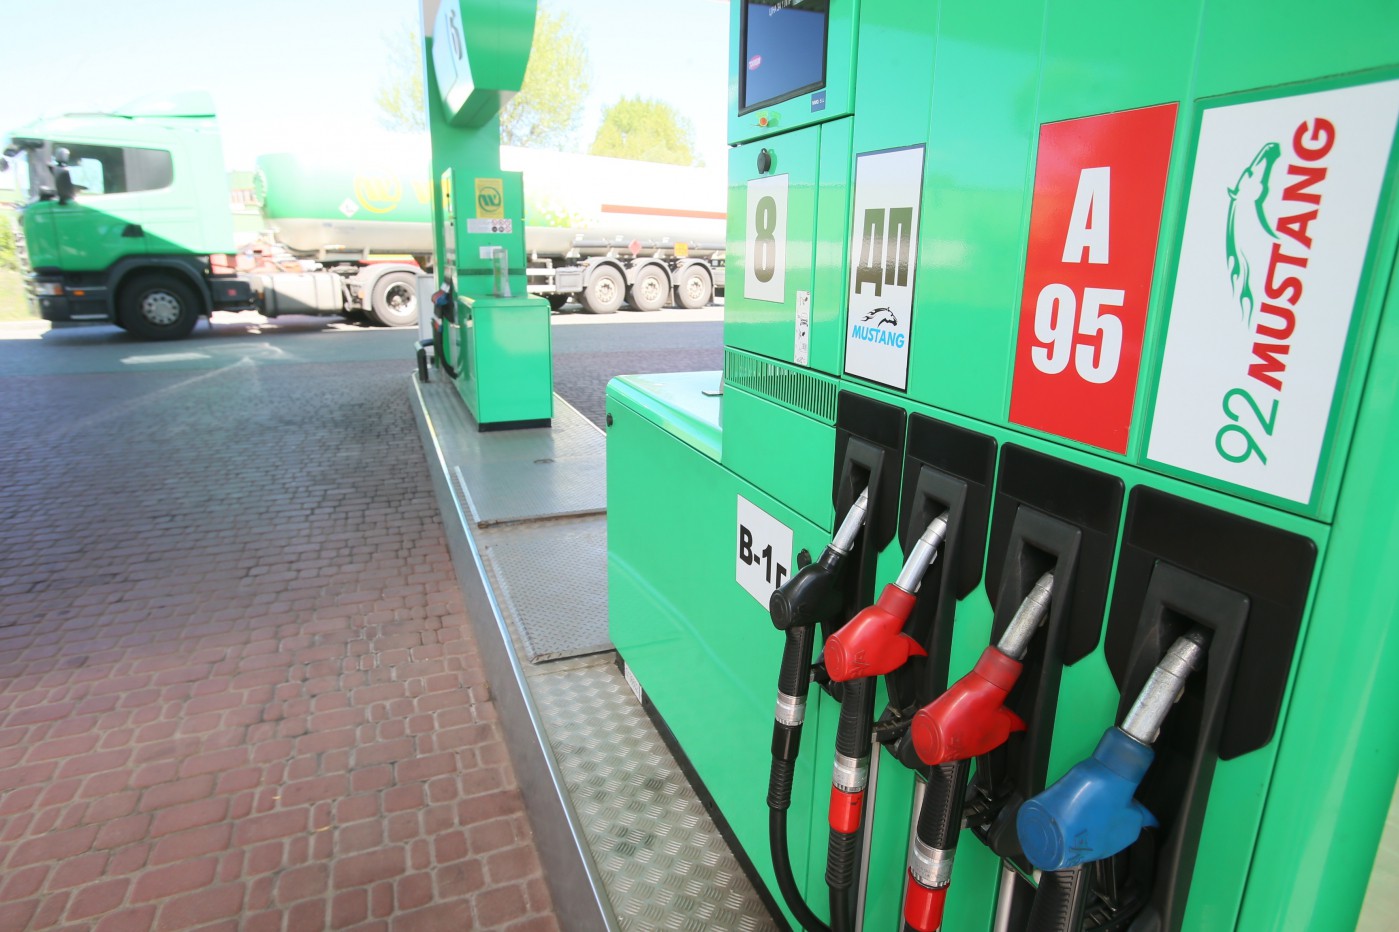 The Price of Autogas at Ukrainian GAS Stations Continues to Break Records